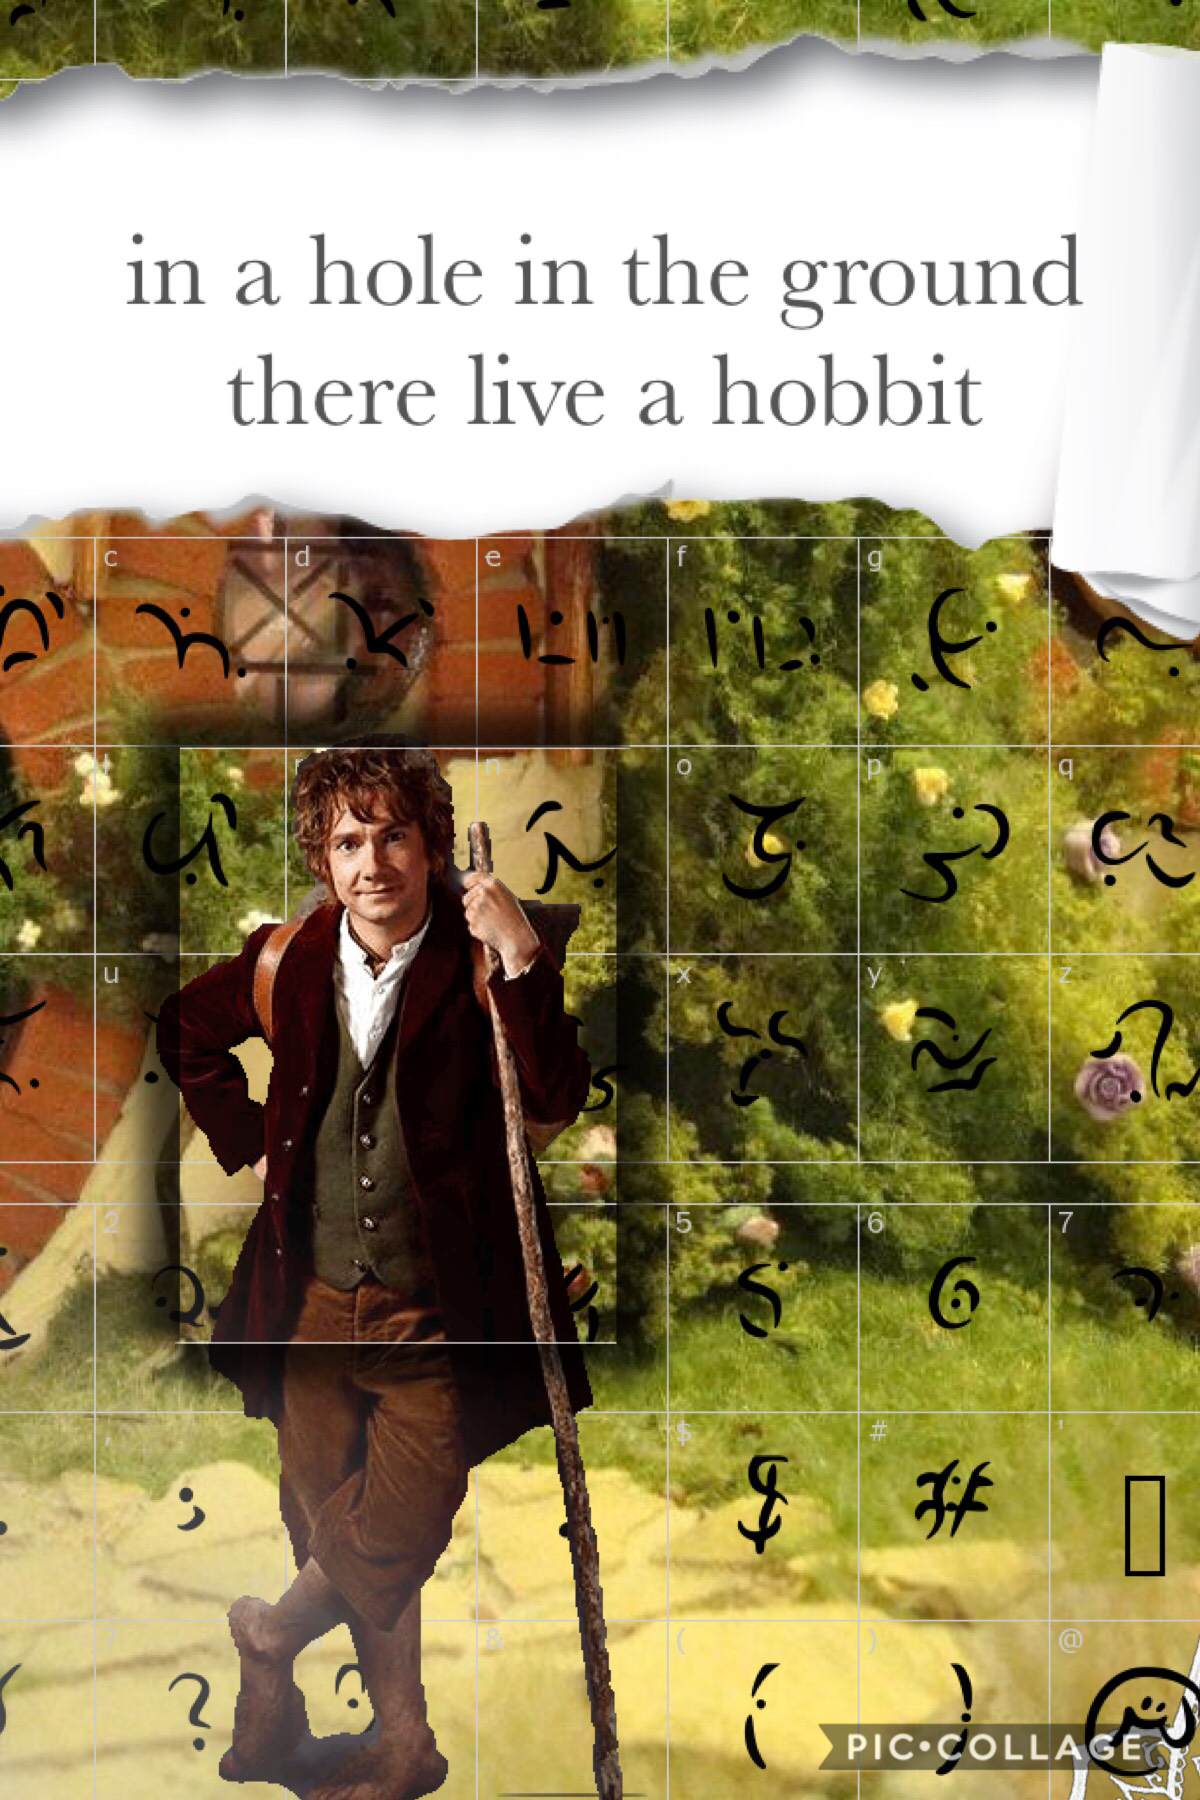 the hobbit! 
my account is basically just going to be posting from movies and books and shows that i and other likes!